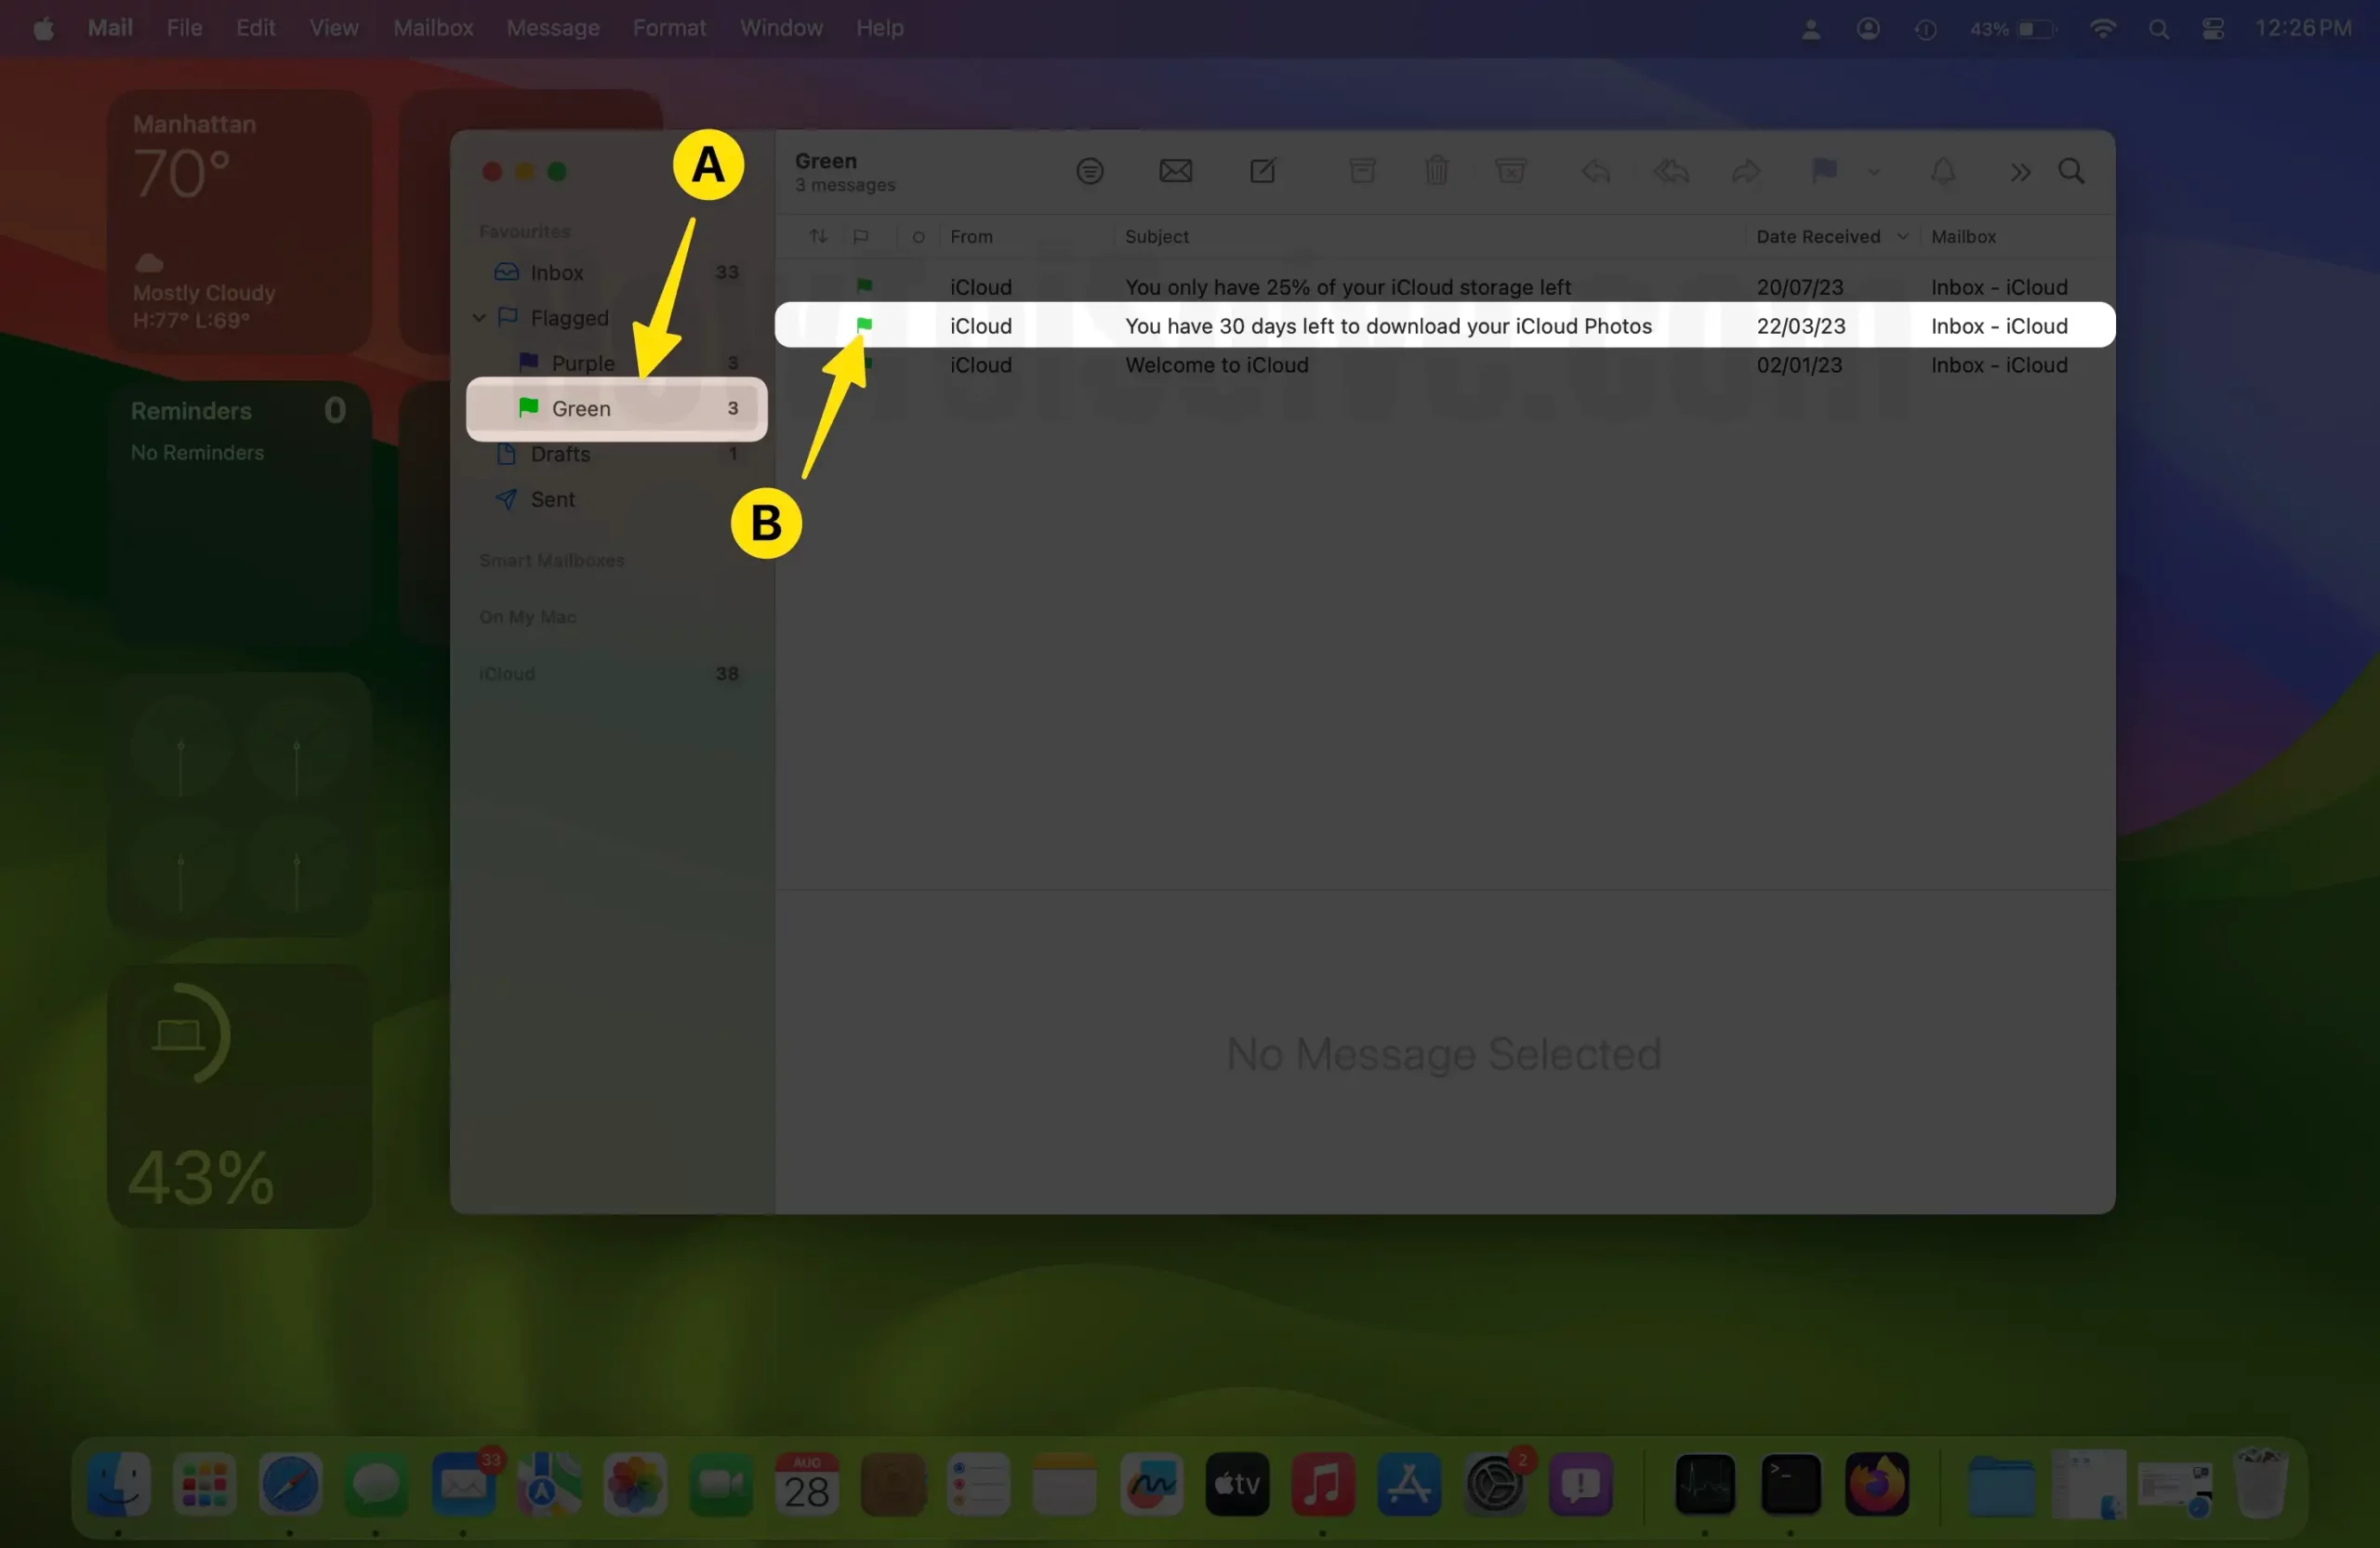 View All Flagged Emails in Mail app on Mac